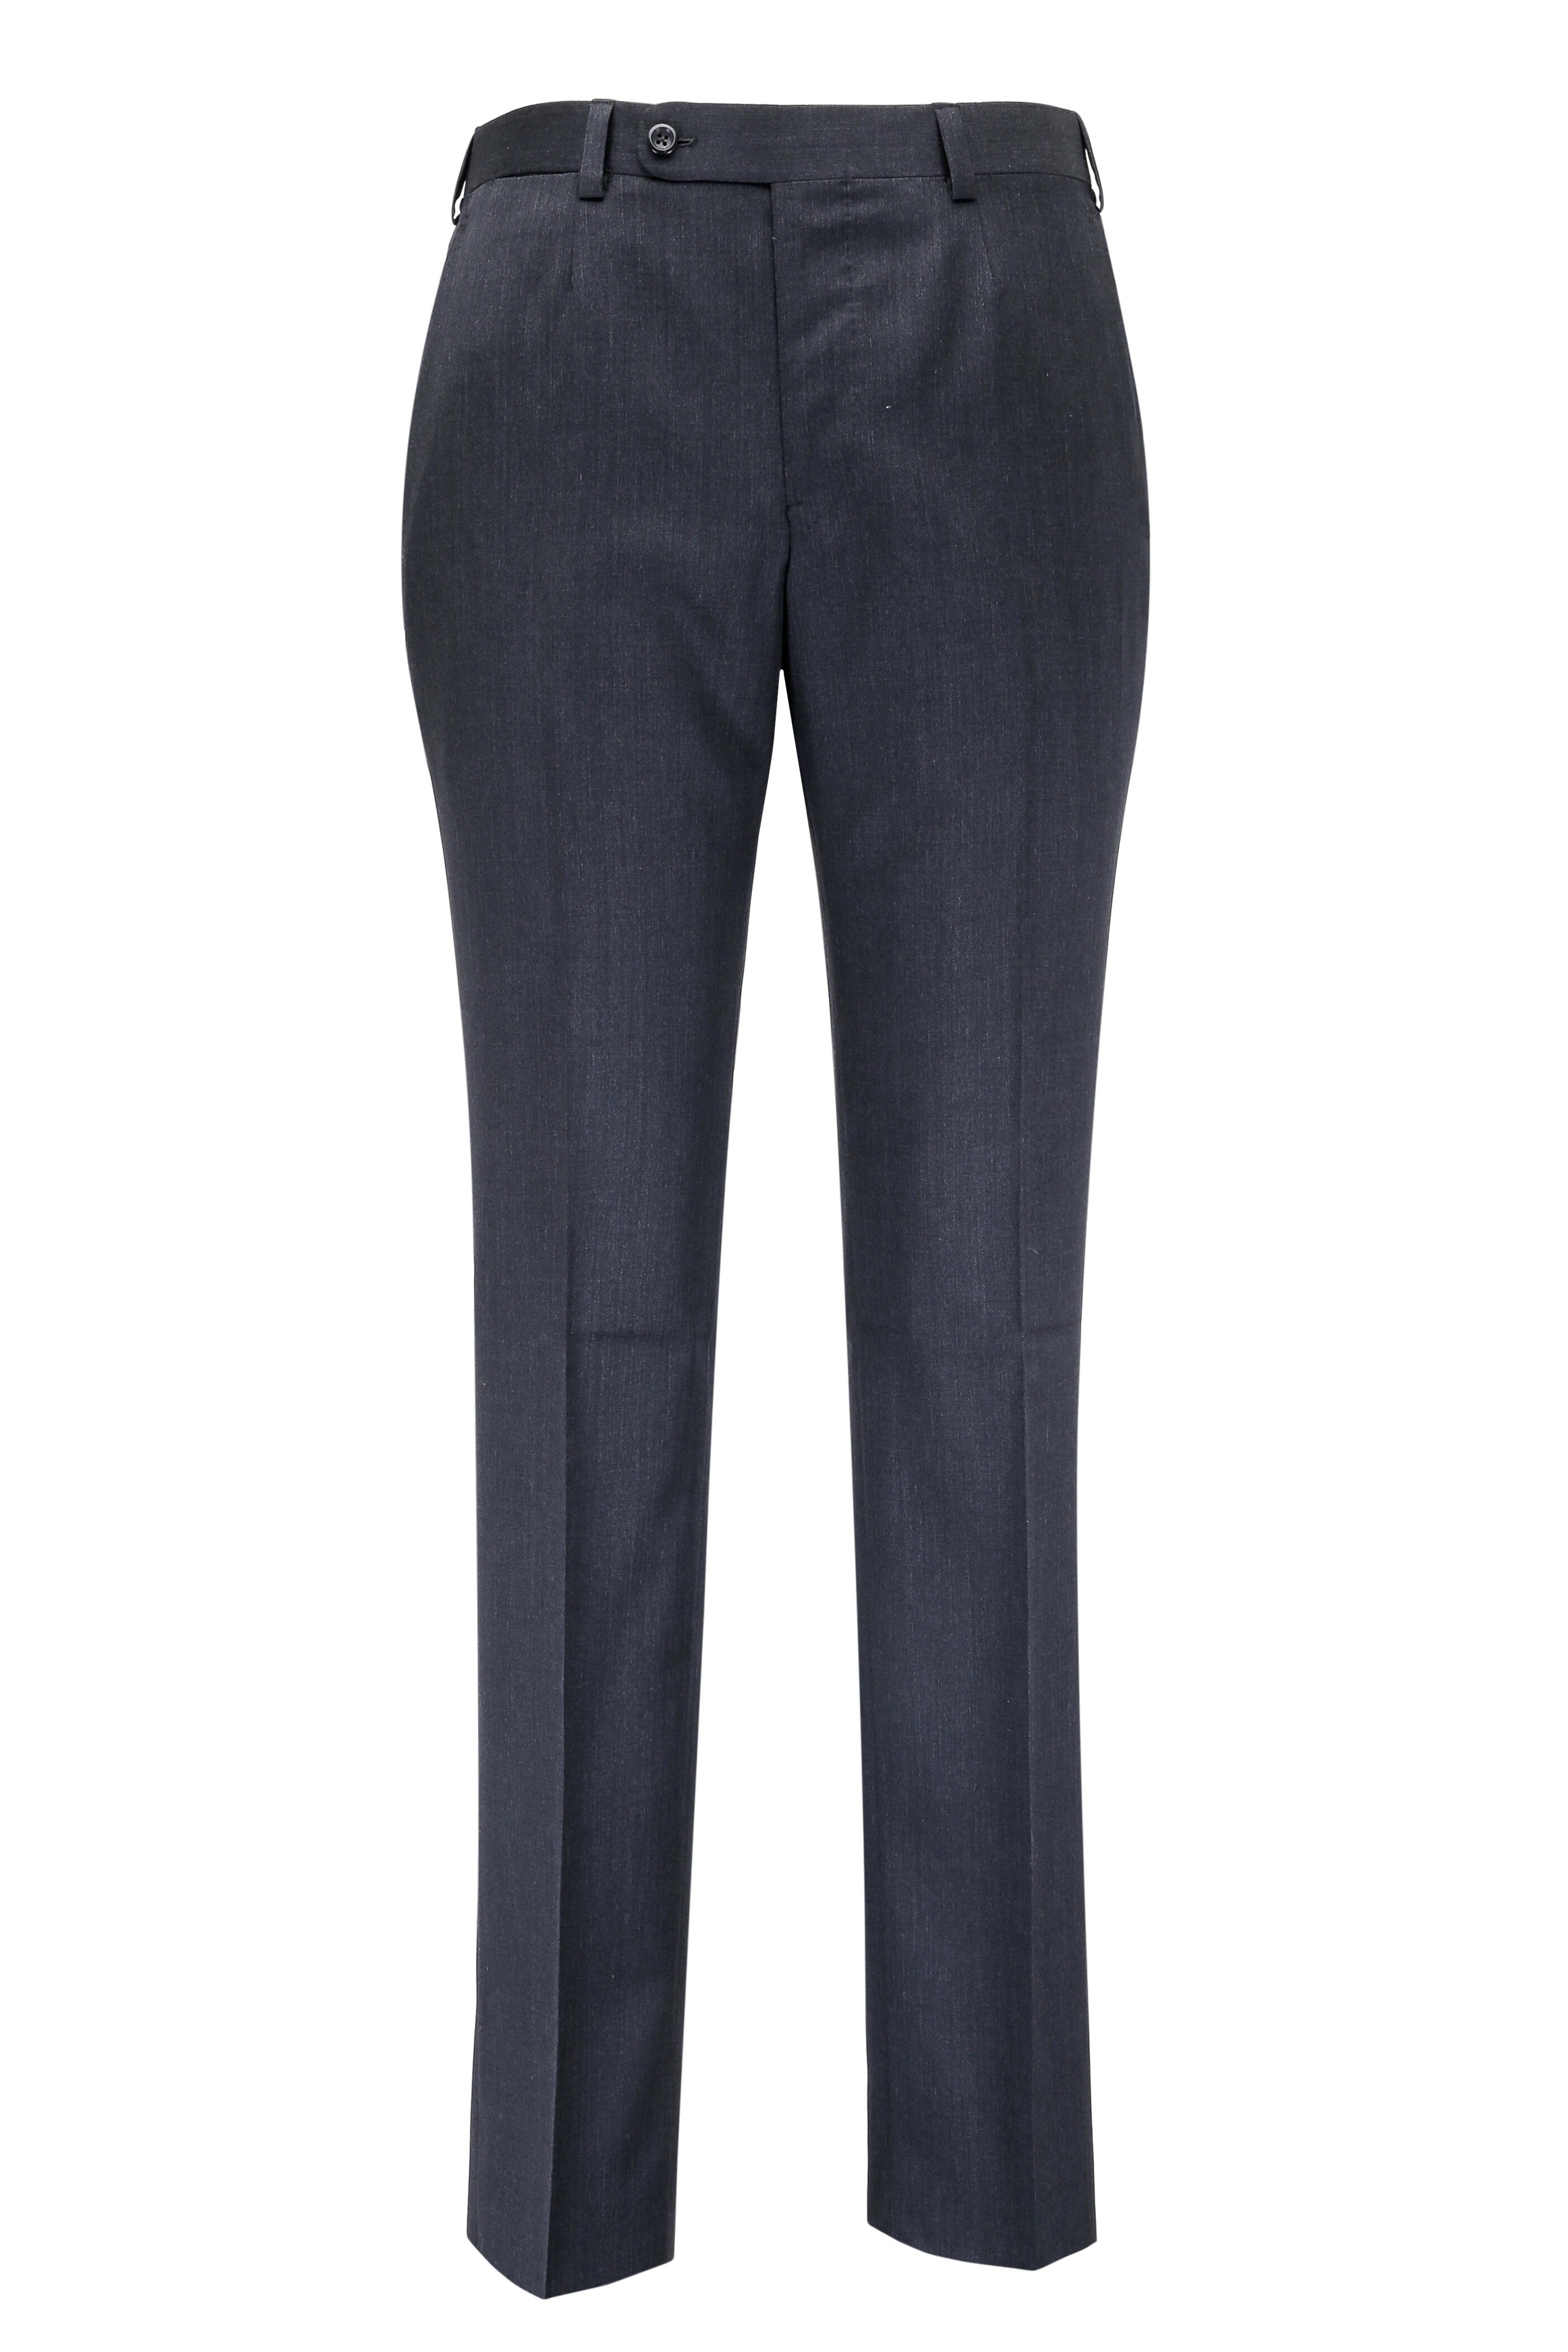 Oxxford Clothes - Dark Gray Wool Trouser | Mitchell Stores